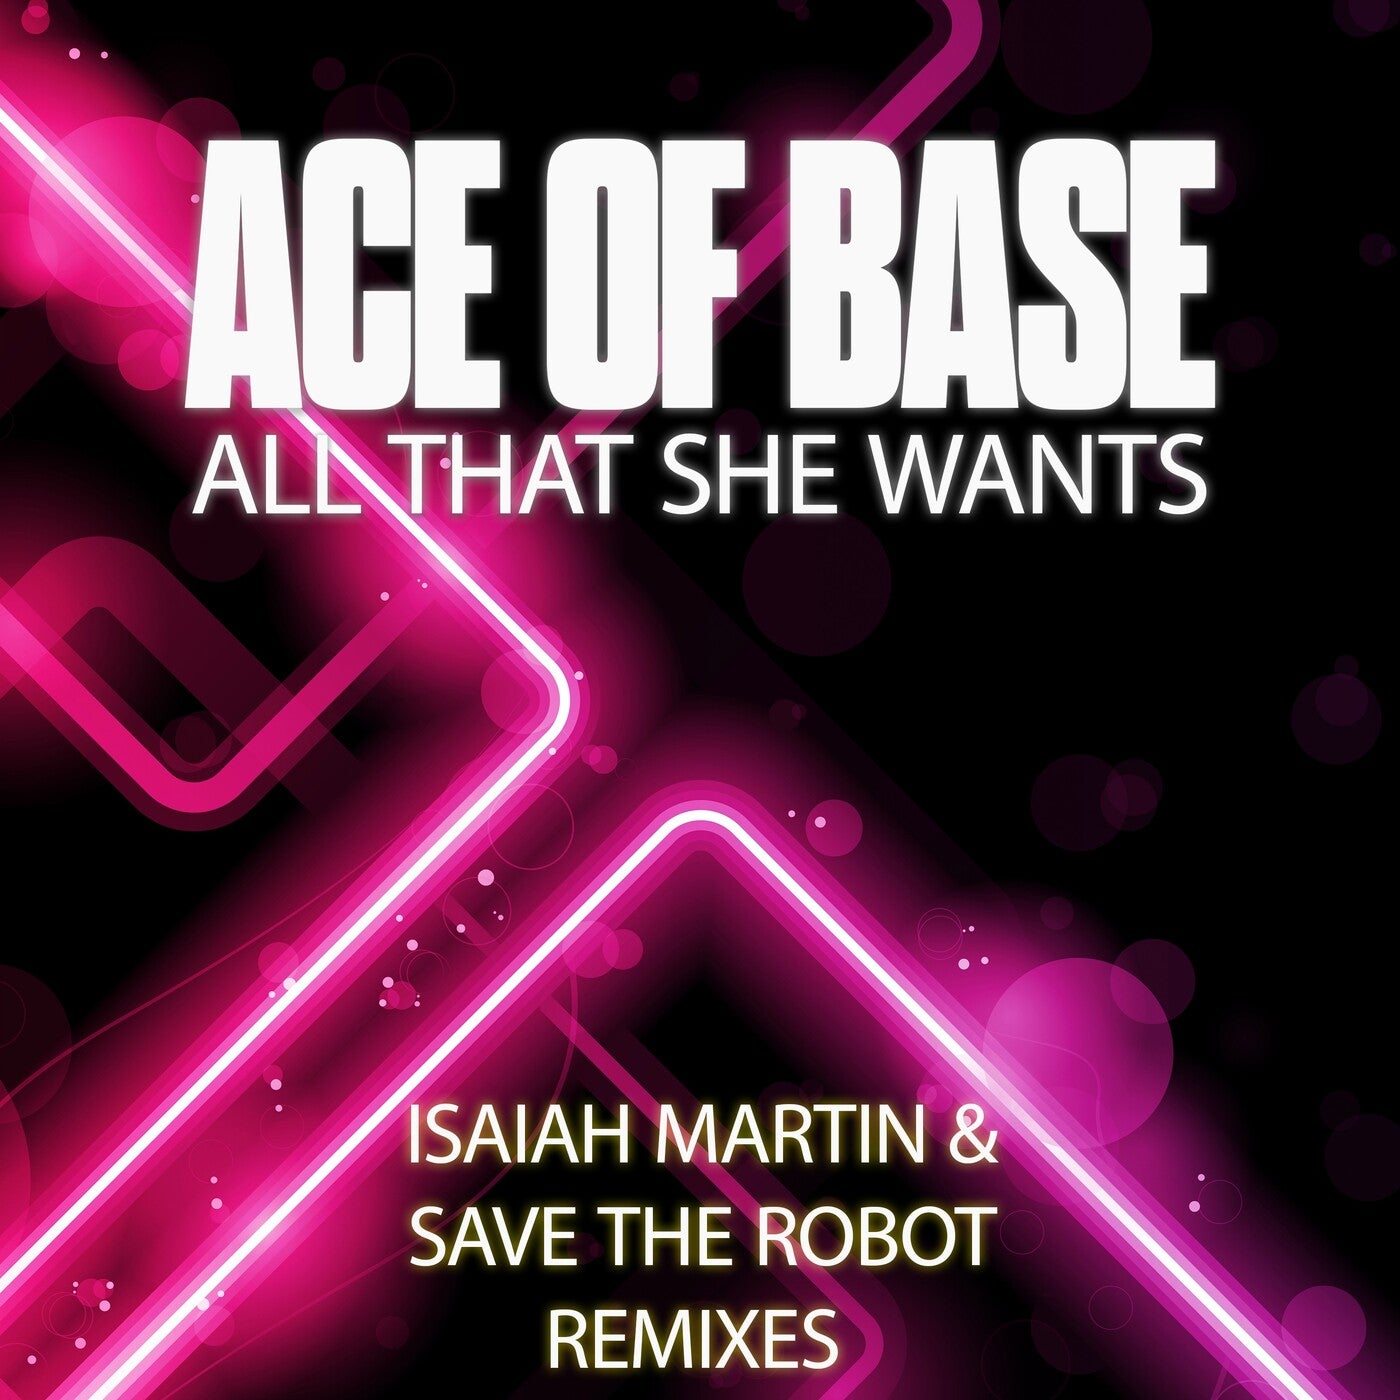 Ace of Base Release 'New' Album, Share Stories Behind the Band's 5